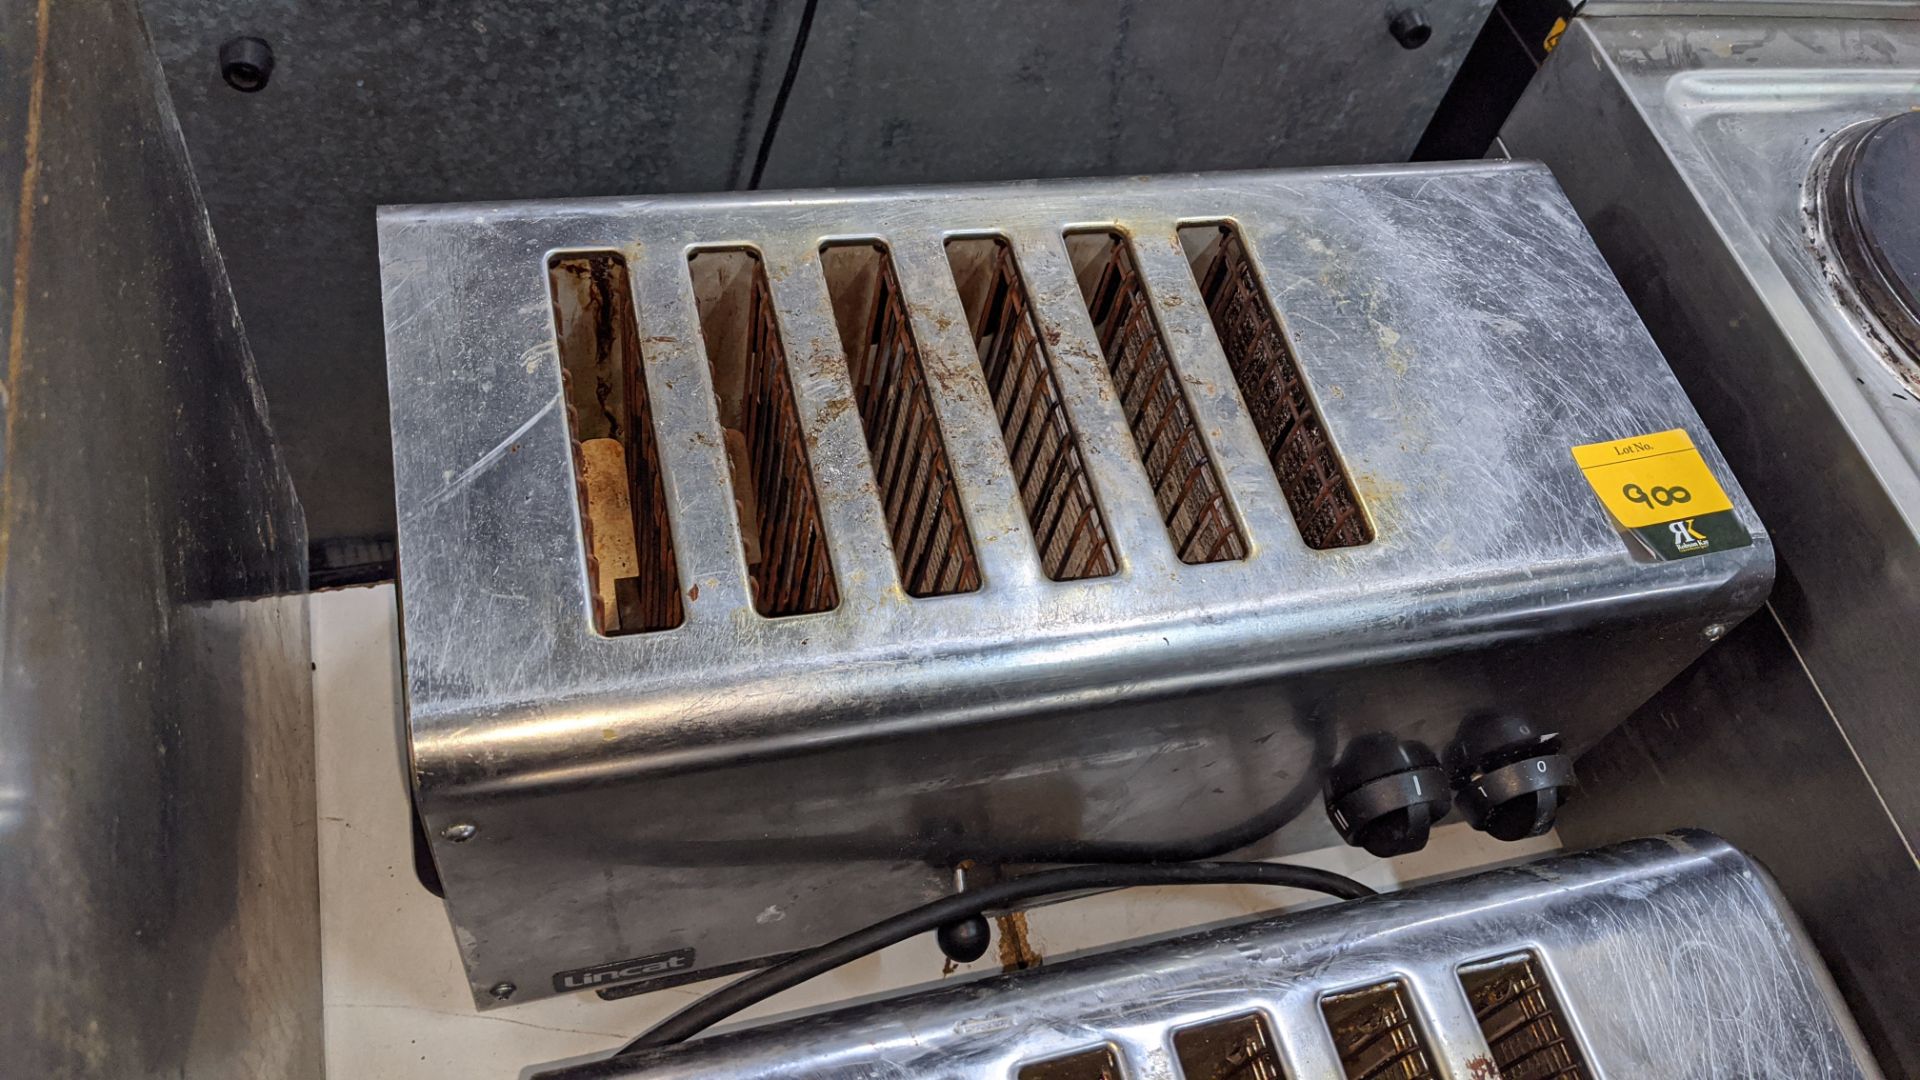 Lincat 6 slice stainless steel toaster. IMPORTANT: Please remember goods successfully bid upon - Image 2 of 4